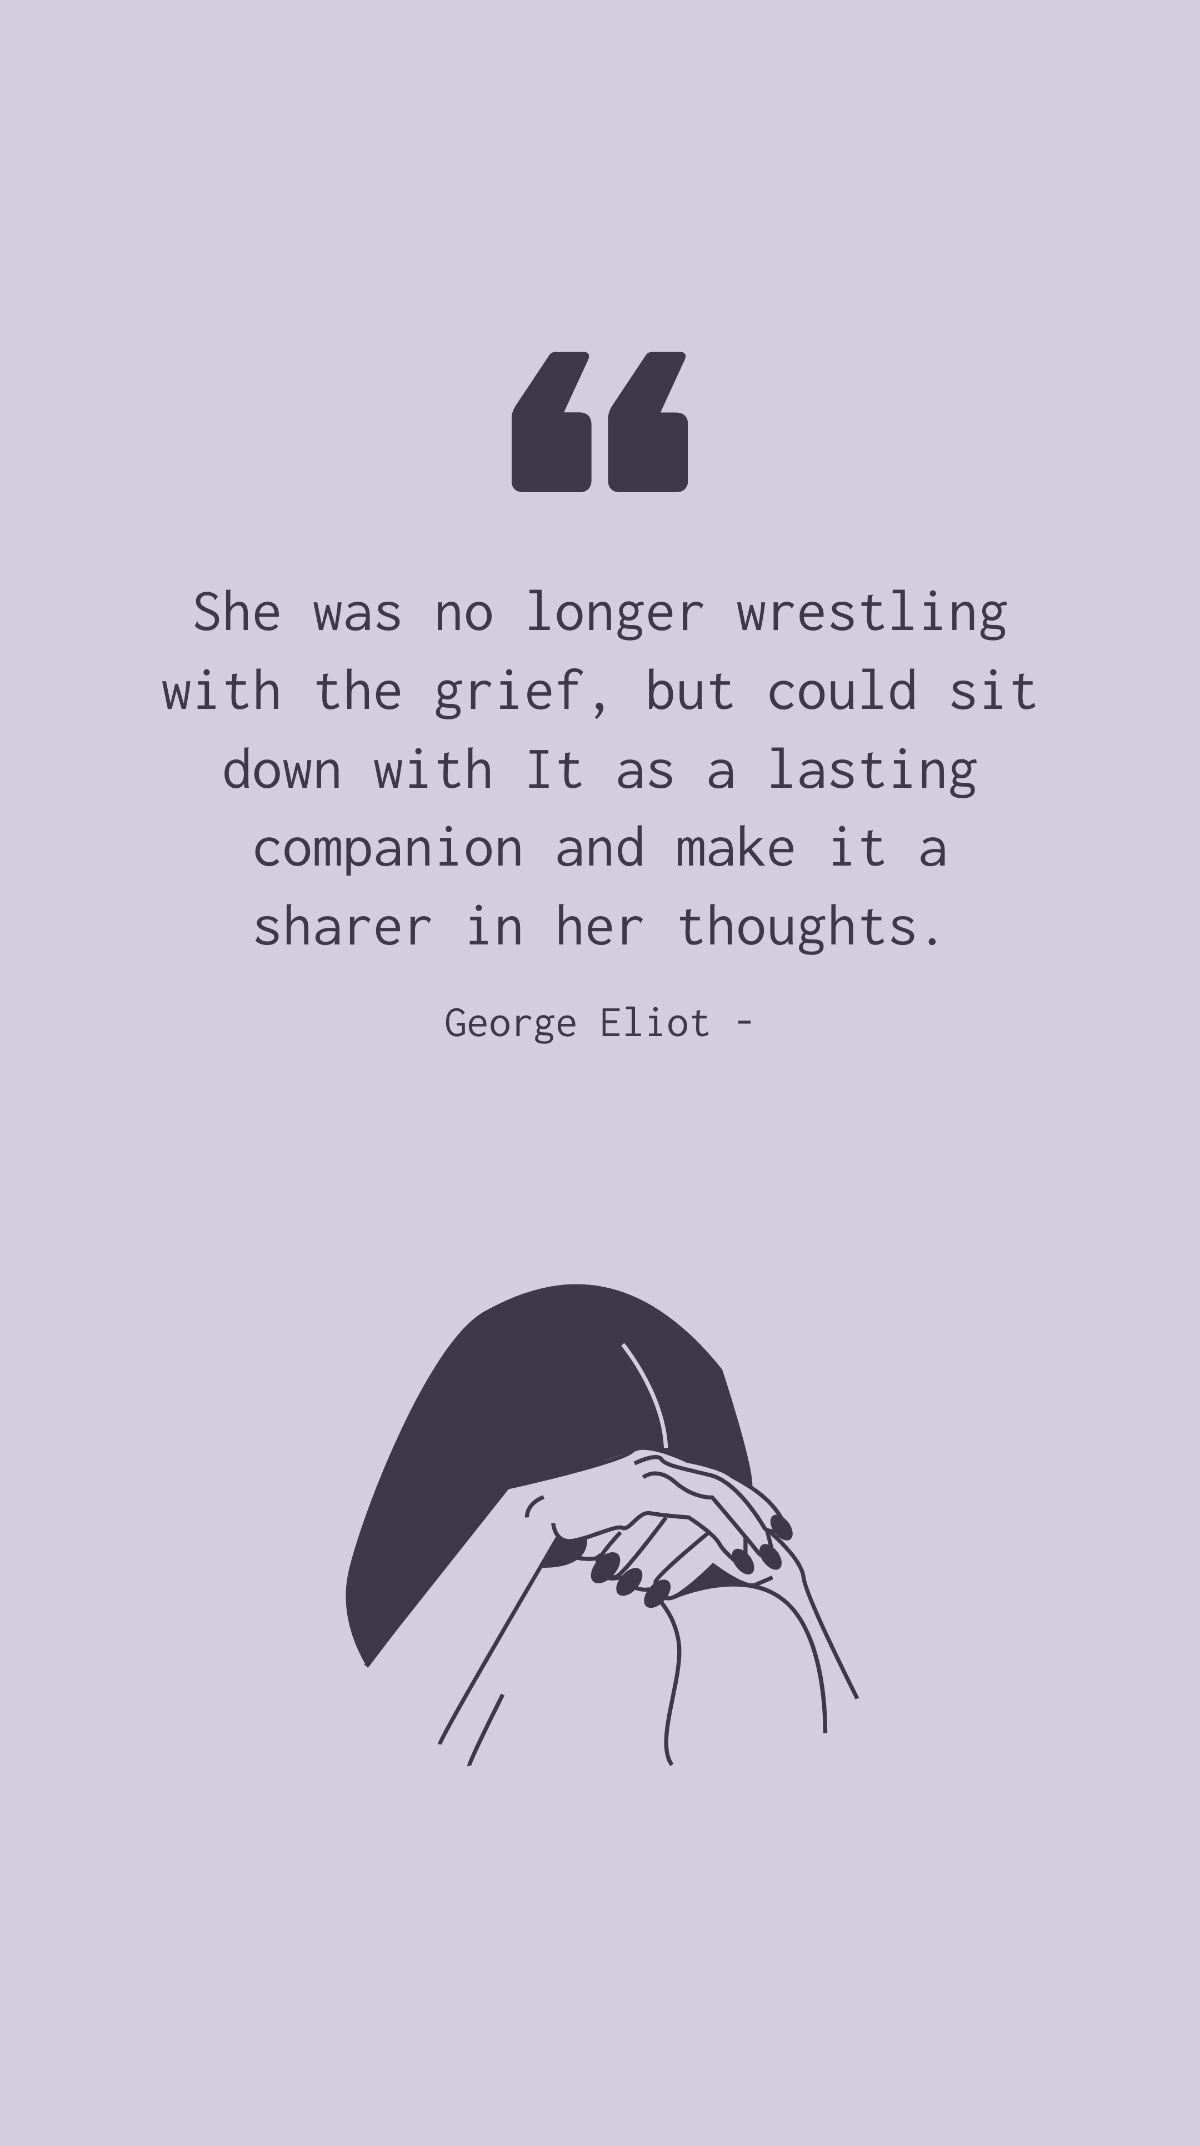 Free George Eliot - She was no longer wrestling with the grief, but could sit down with It as a lasting companion and make it a sharer in her thoughts. Template